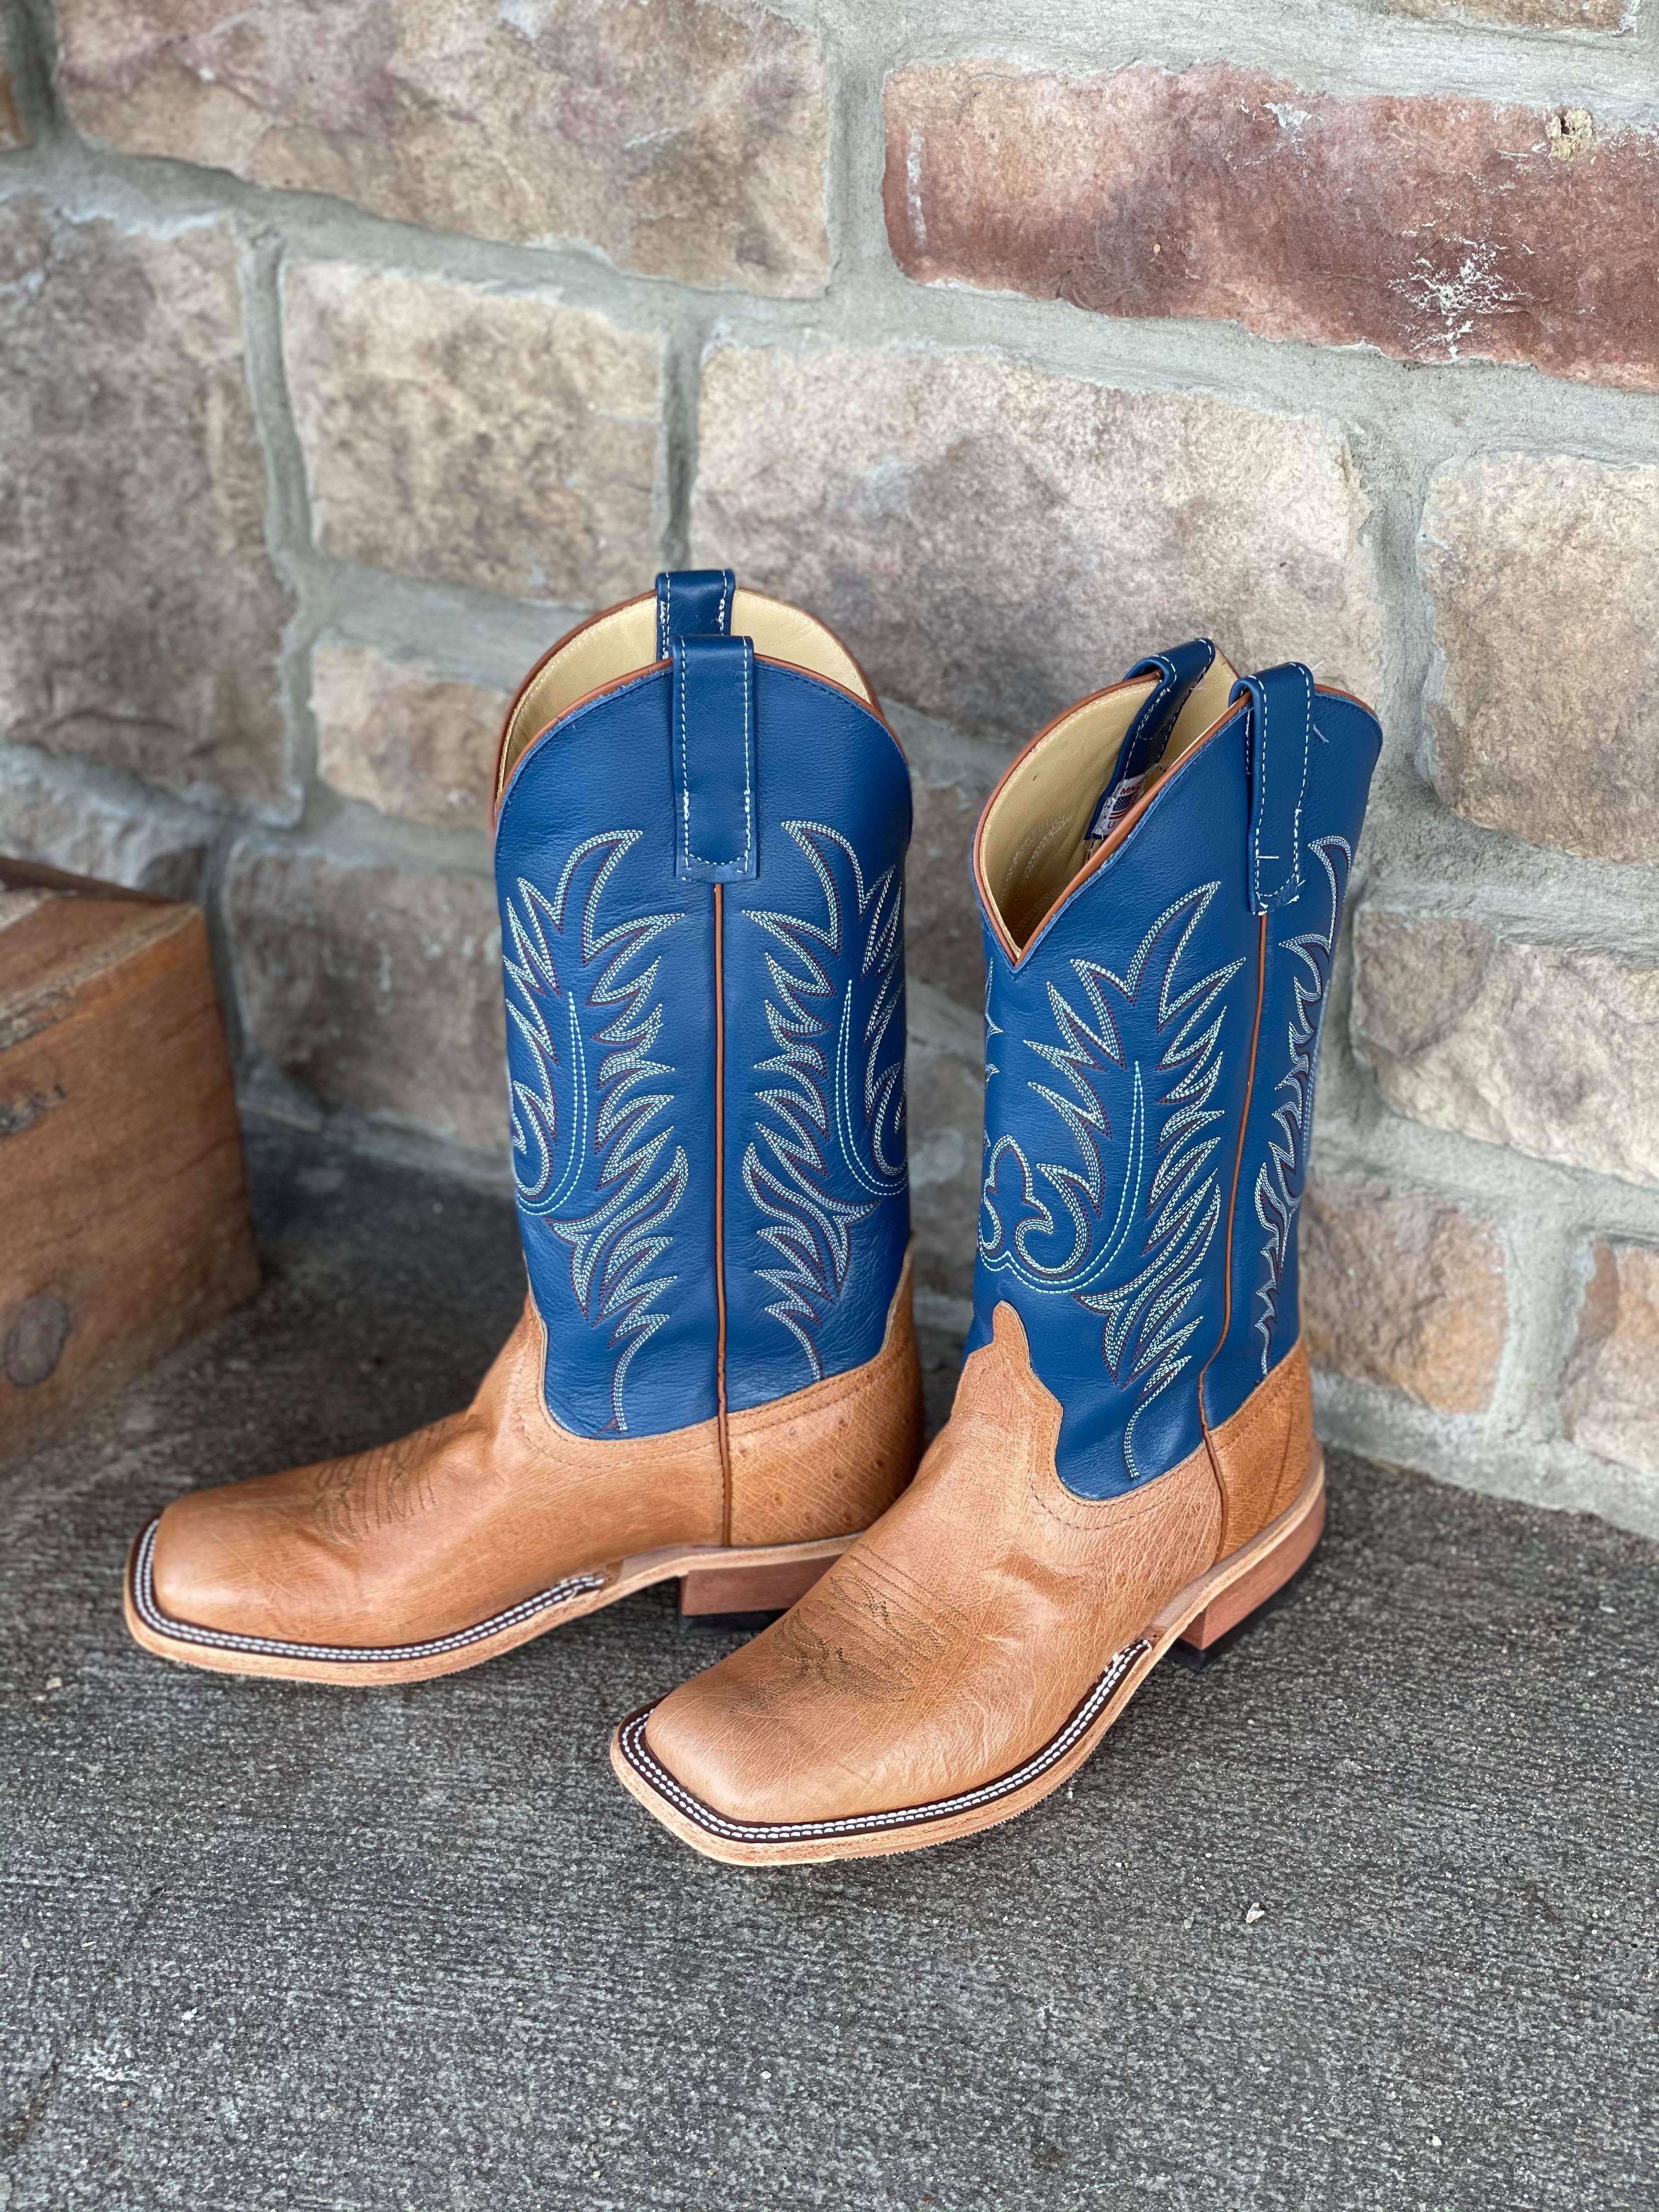 AB Men's Cognac Mad Dog Smooth Ostrich Square Toe-Men's Boots-Anderson Bean-Lucky J Boots & More, Women's, Men's, & Kids Western Store Located in Carthage, MO